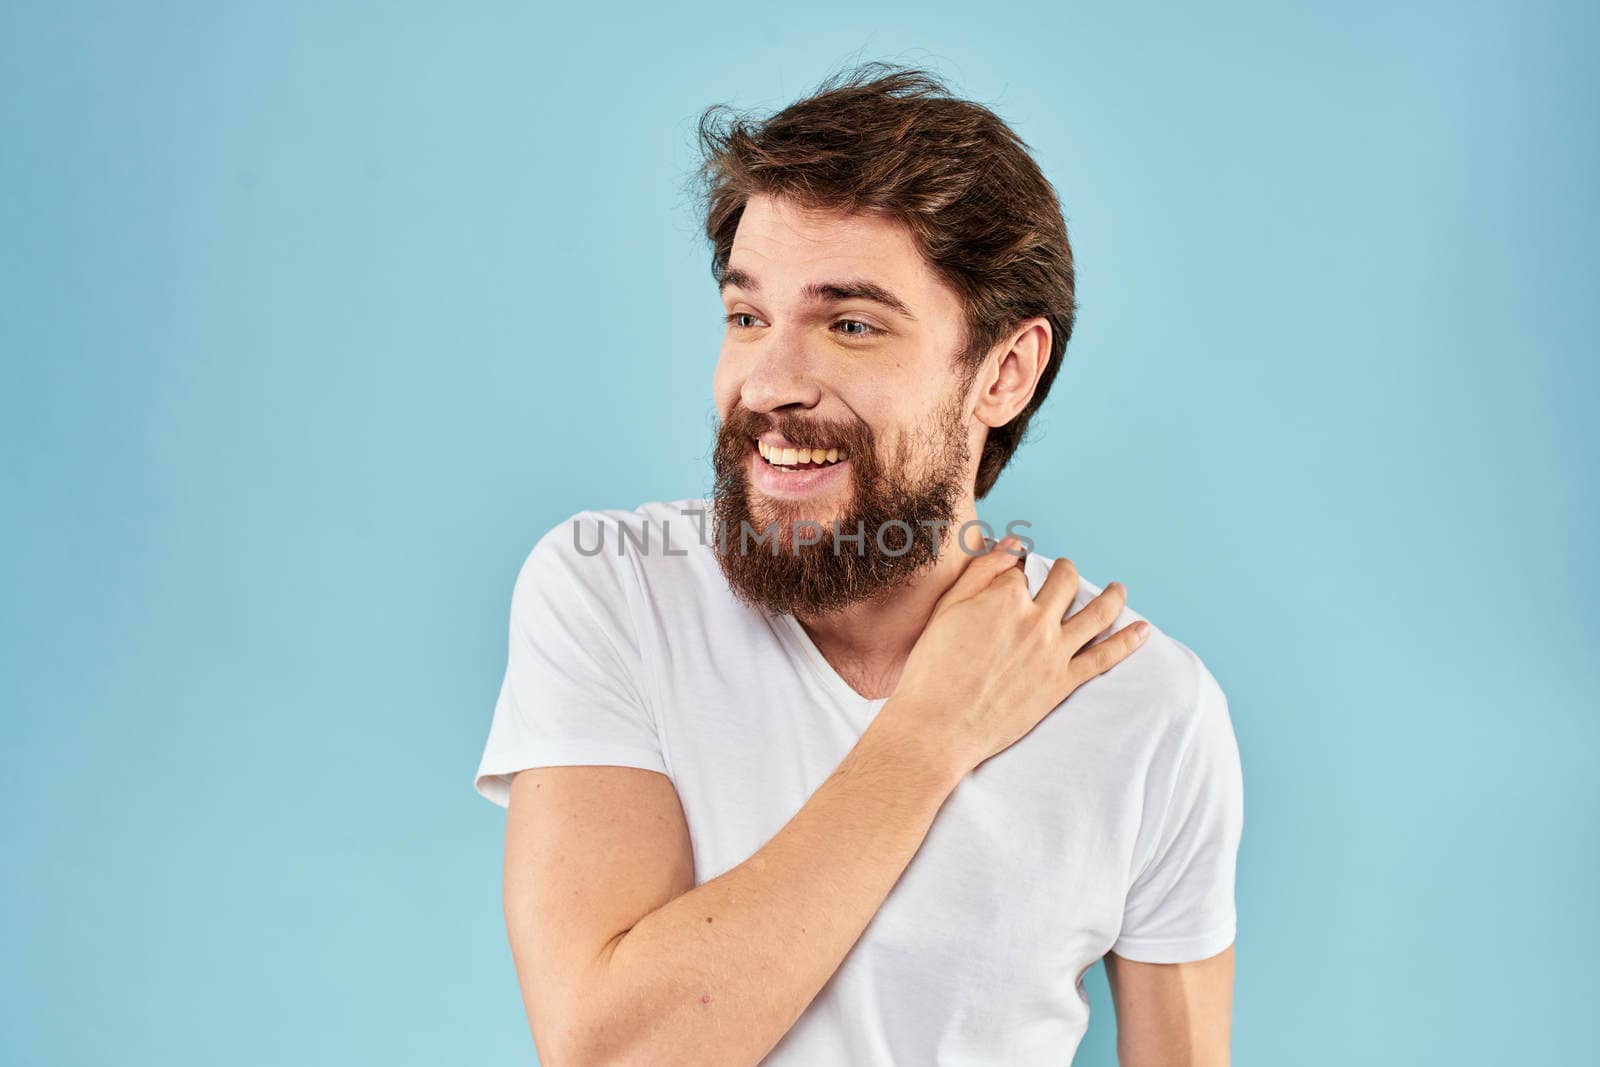 Cheerful man gesturing with his hands emotions cropped view on blue background studio by SHOTPRIME